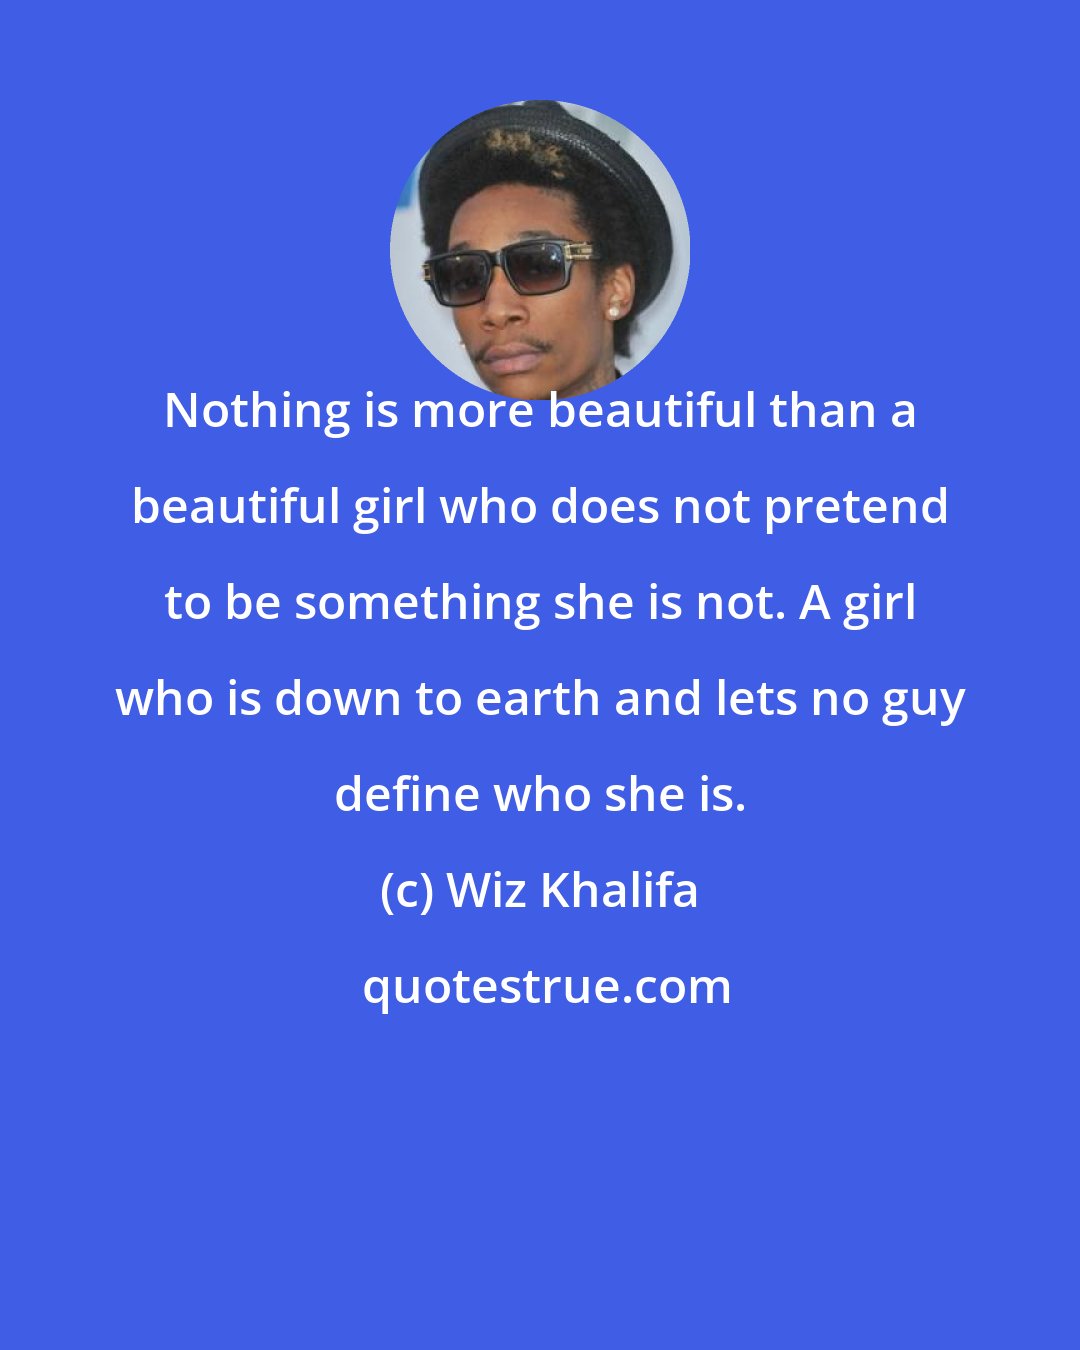 Wiz Khalifa: Nothing is more beautiful than a beautiful girl who does not pretend to be something she is not. A girl who is down to earth and lets no guy define who she is.